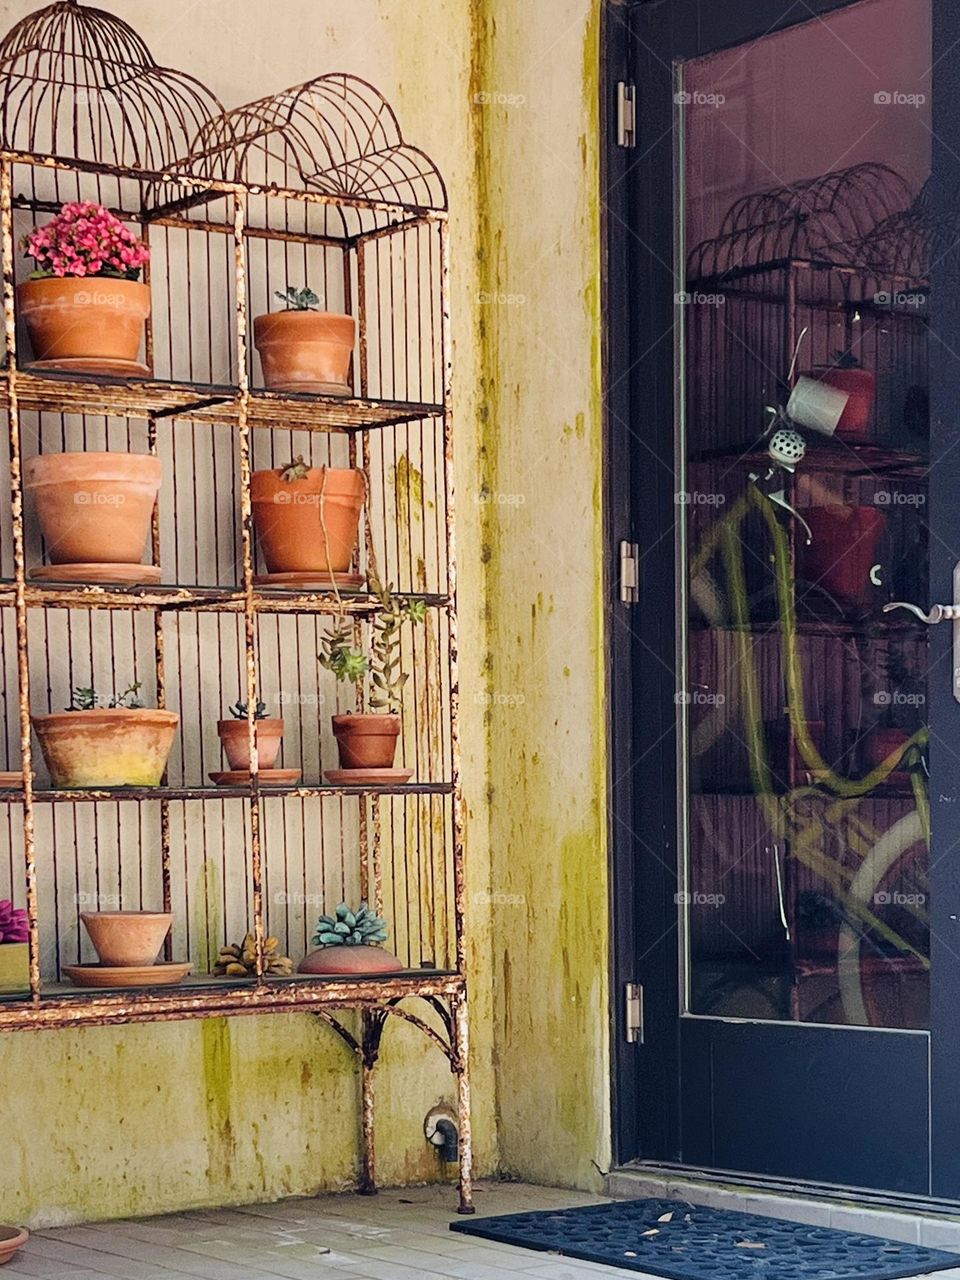 View from outside of a dingle bicycle propped up and stored just inside a front door. A rack of potted plants outside reflects across the image on the glass door.